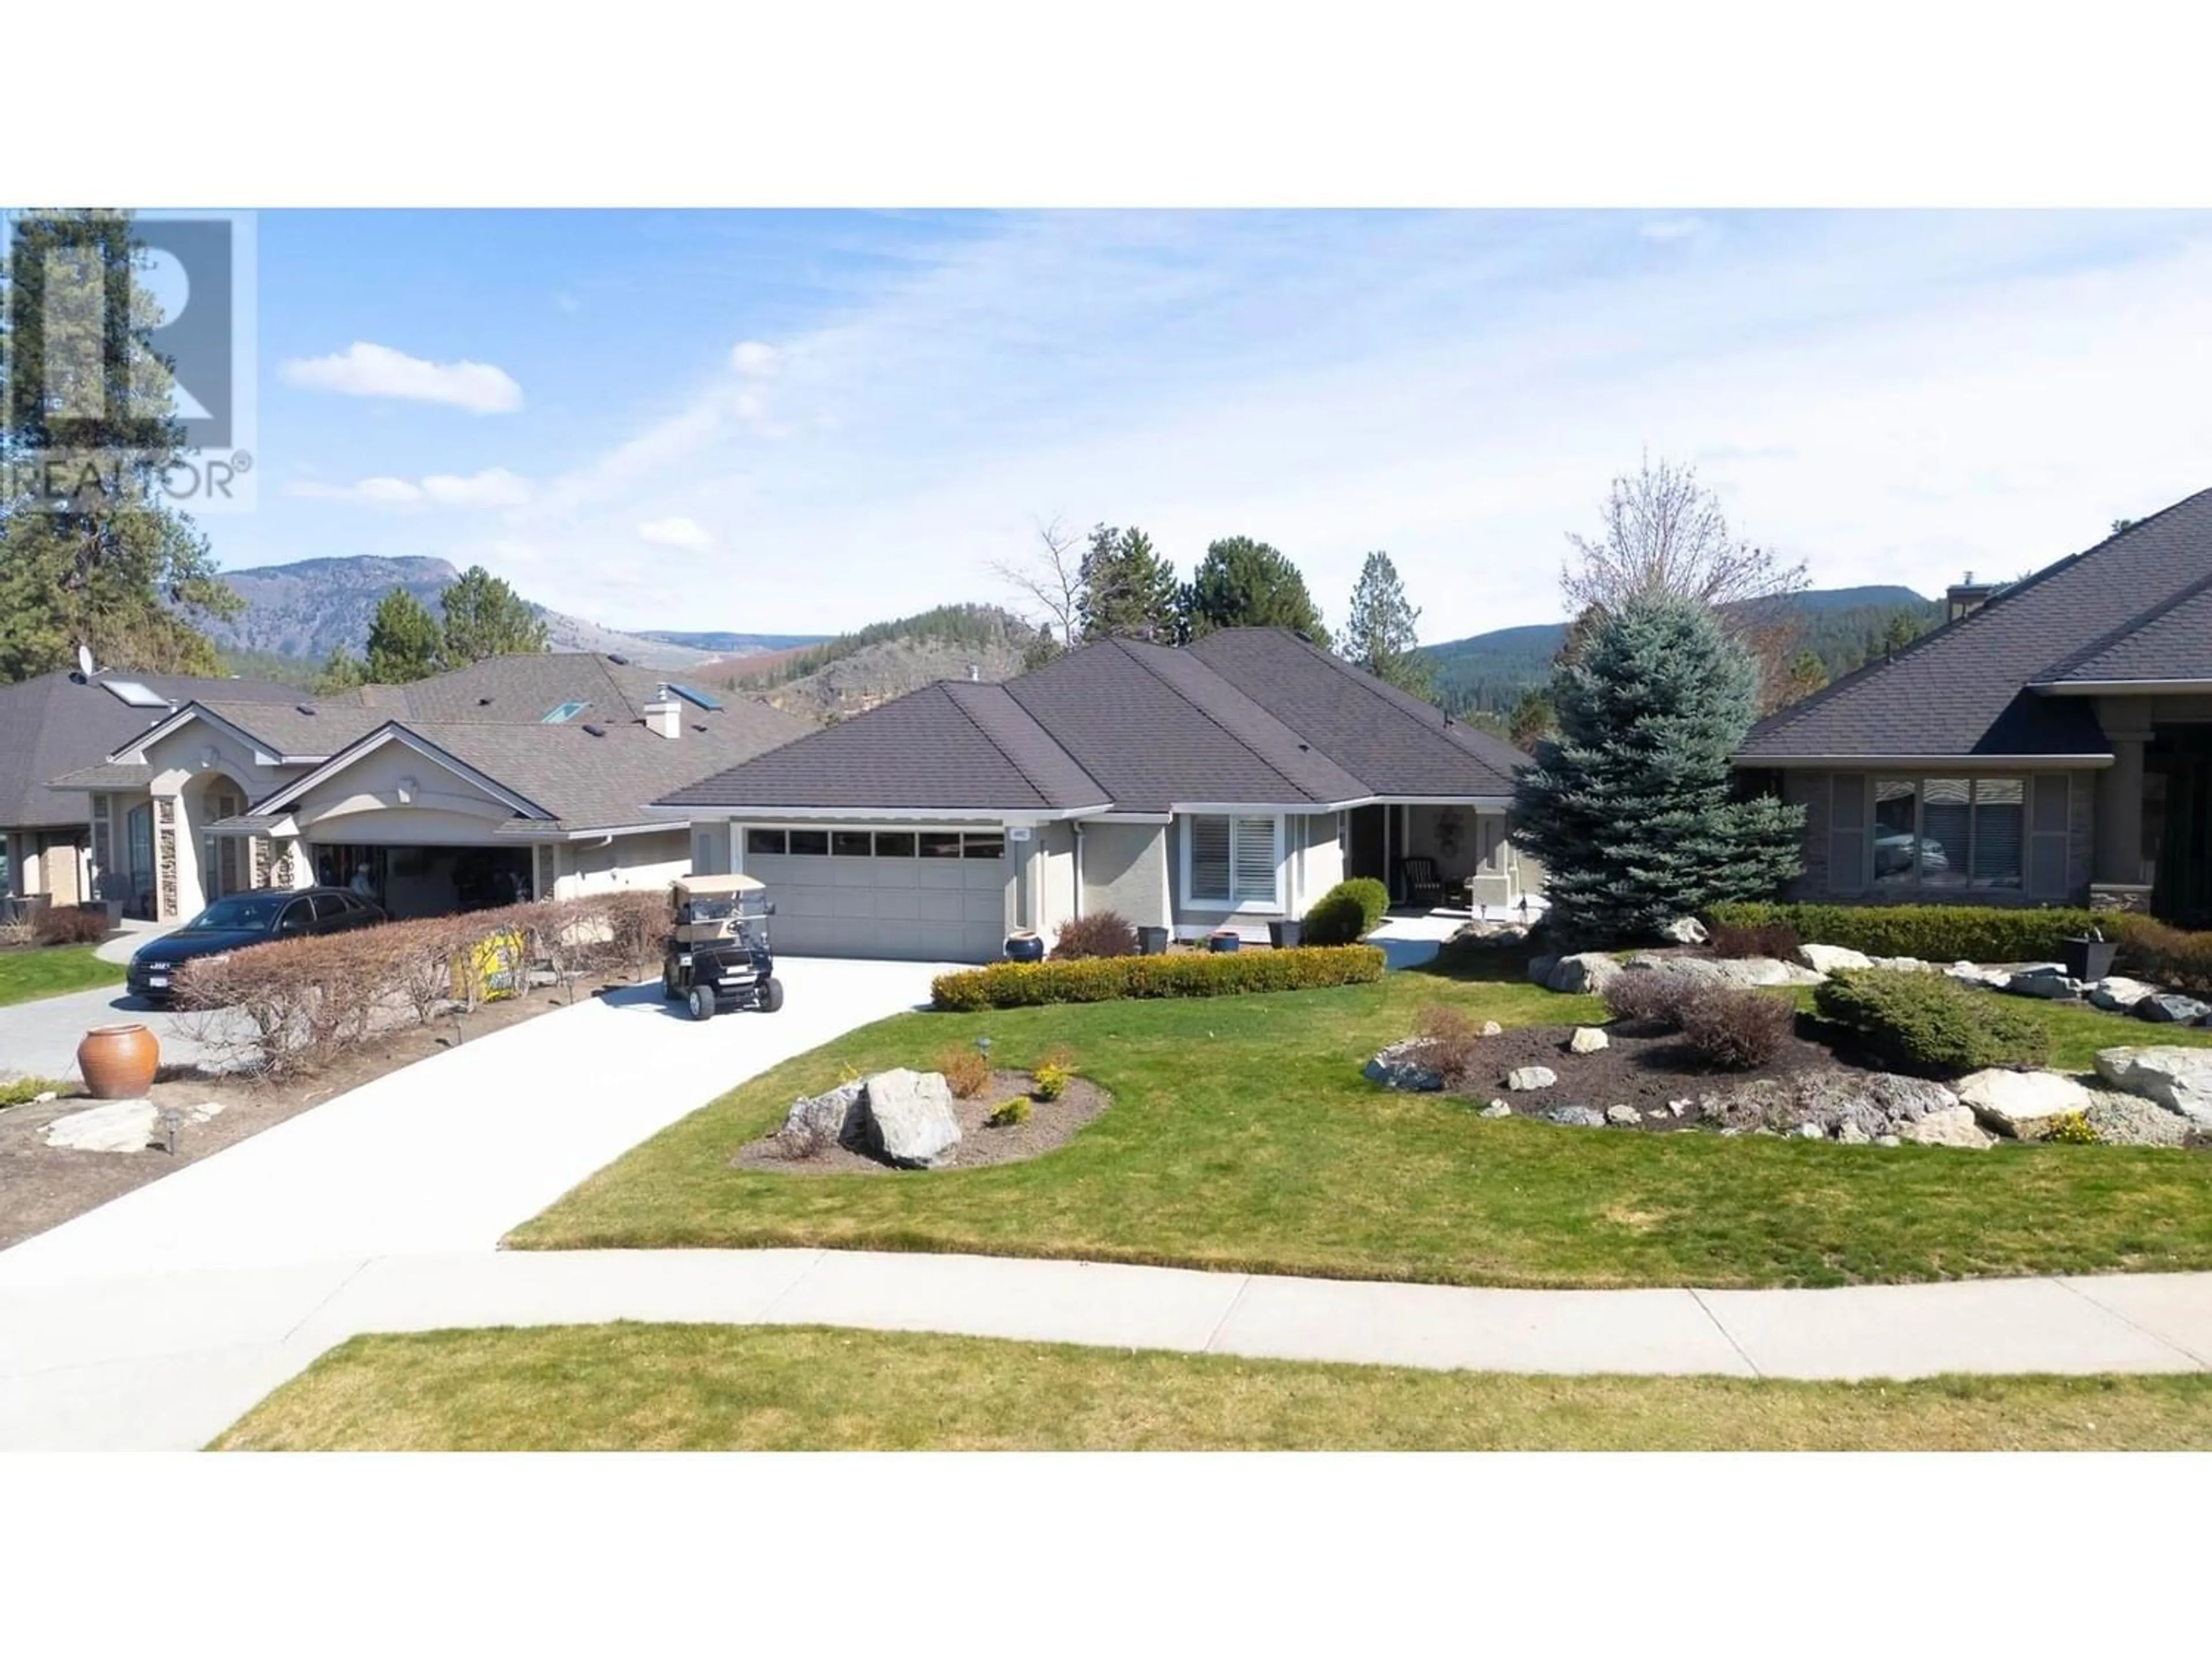 Frontside or backside of a home for 4002 Gallaghers Green, Kelowna British Columbia V1W3Z8